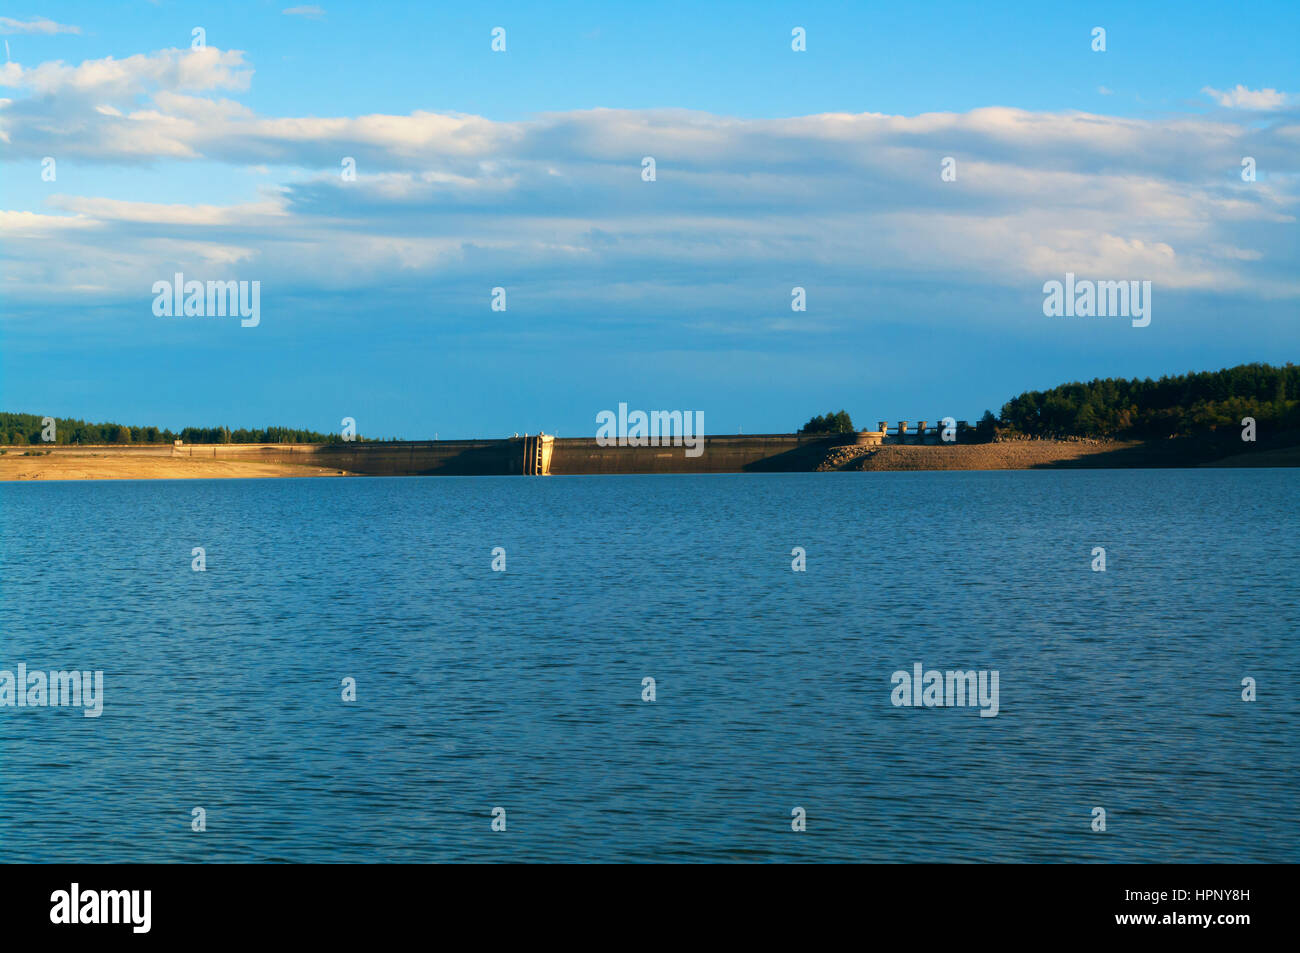 Hydroelectricity. Dam of hydroelectric power plant. Dam reservoir. Water power plant. Stock Photo